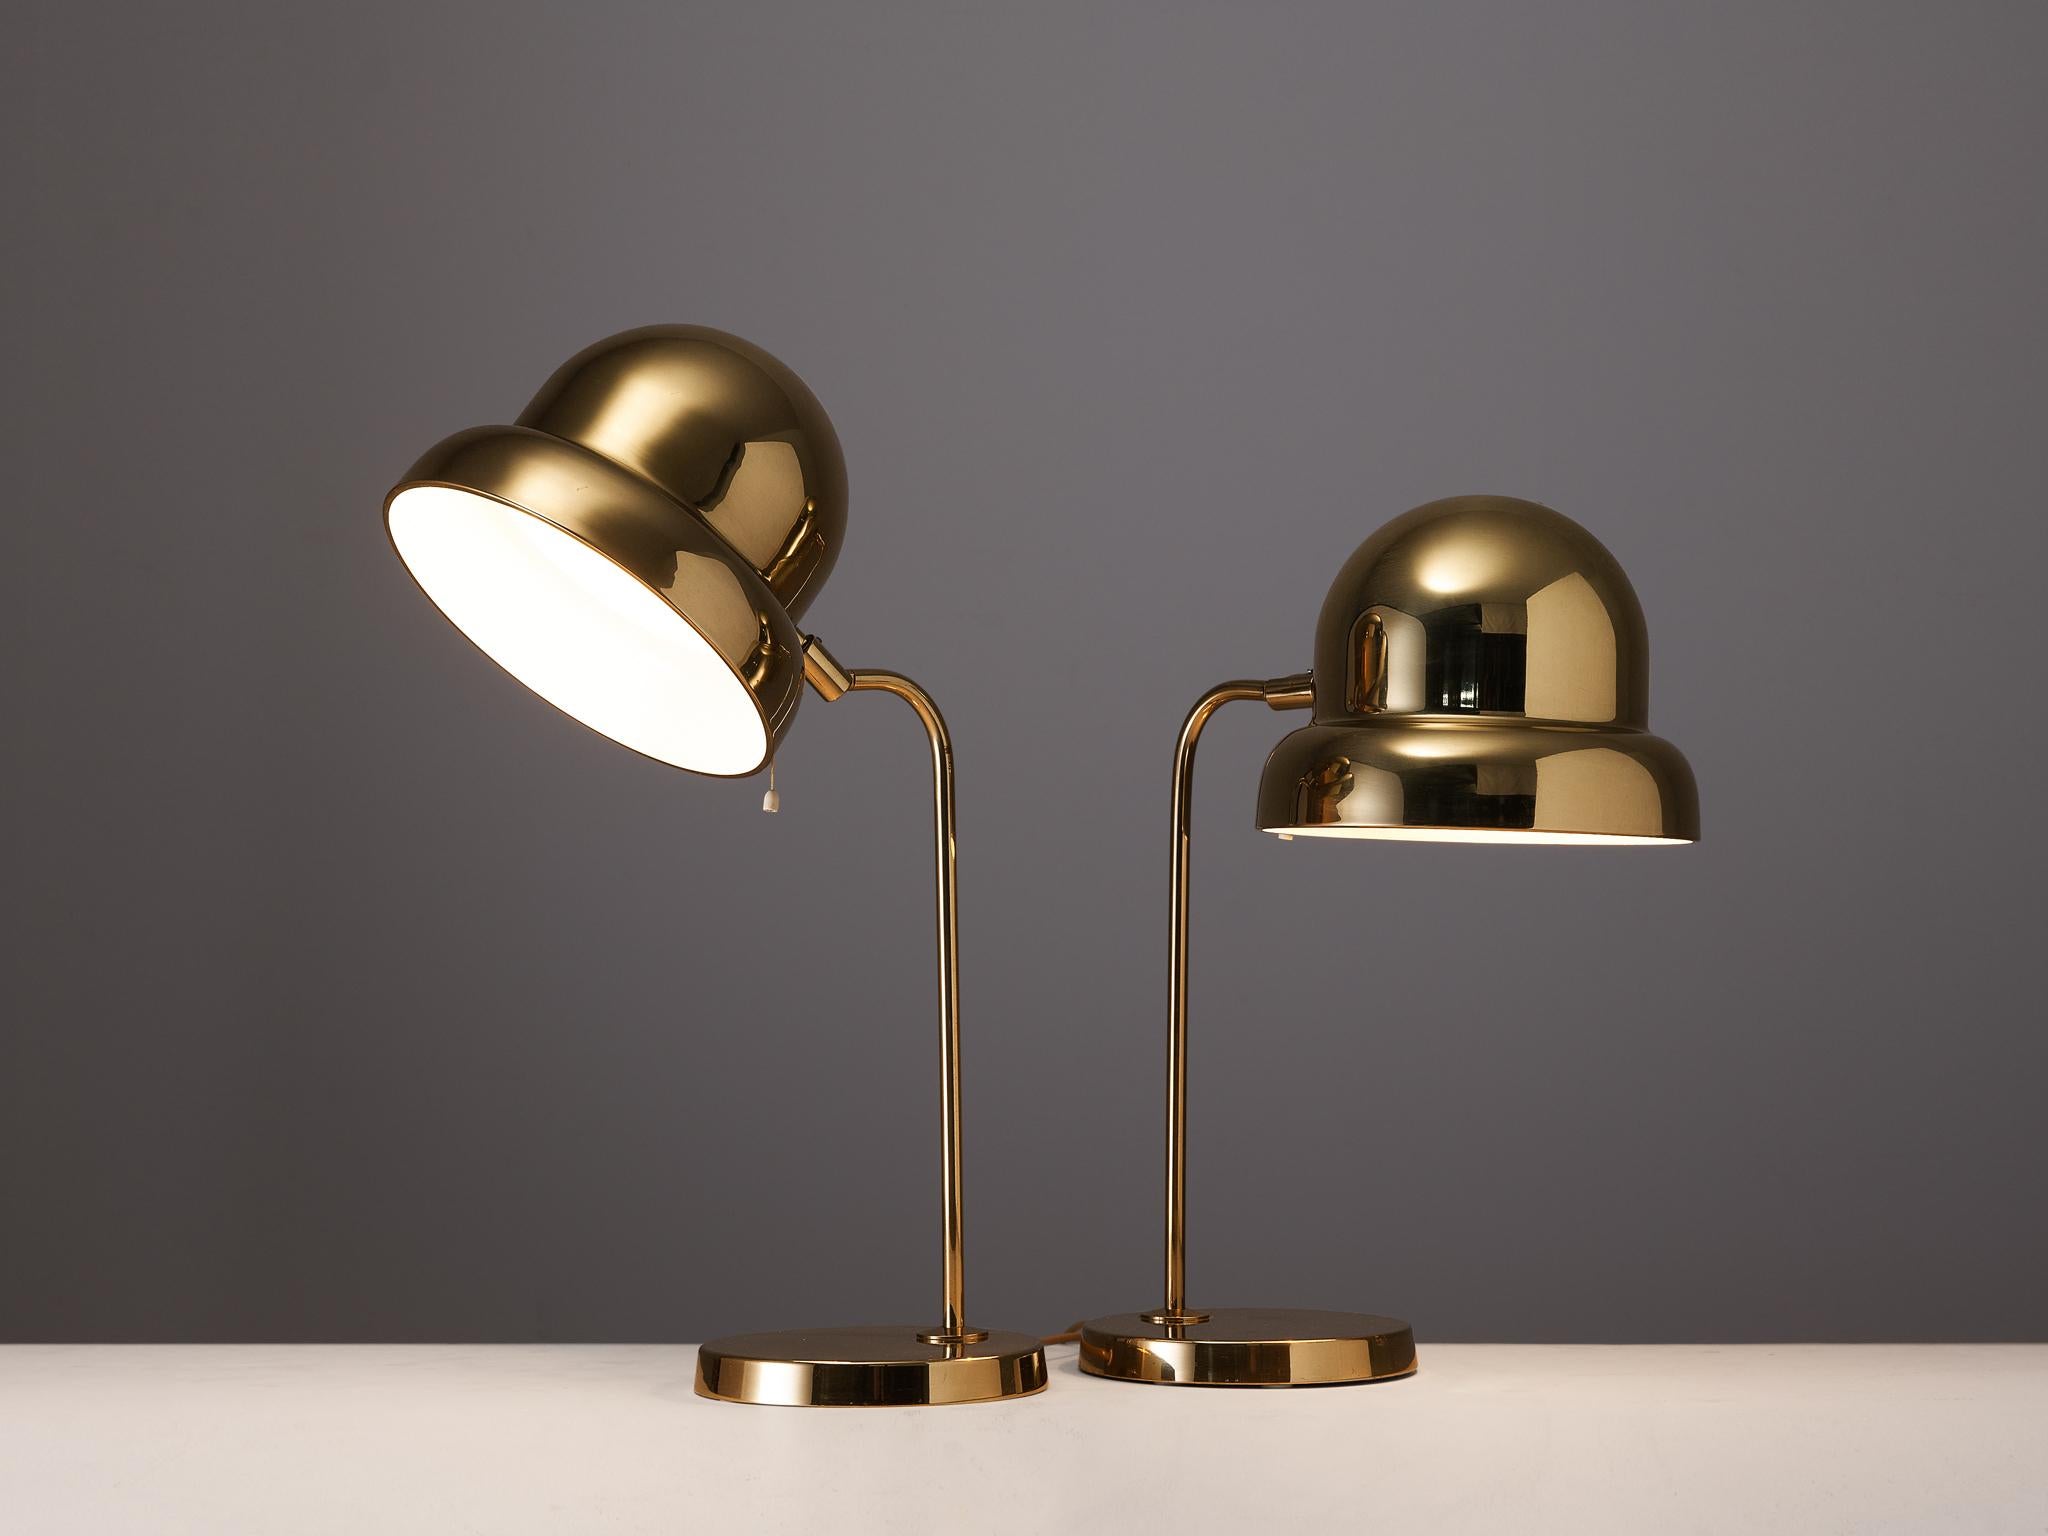 Bergboms, pair of desk / table lamps model ‘B 120M’, metal, brass, Sweden, 1960s.

This delicate pair of table lamps of Swedish origin embodies a splendid construction of round shapes and delicate lines. The shade is well-executed showing a